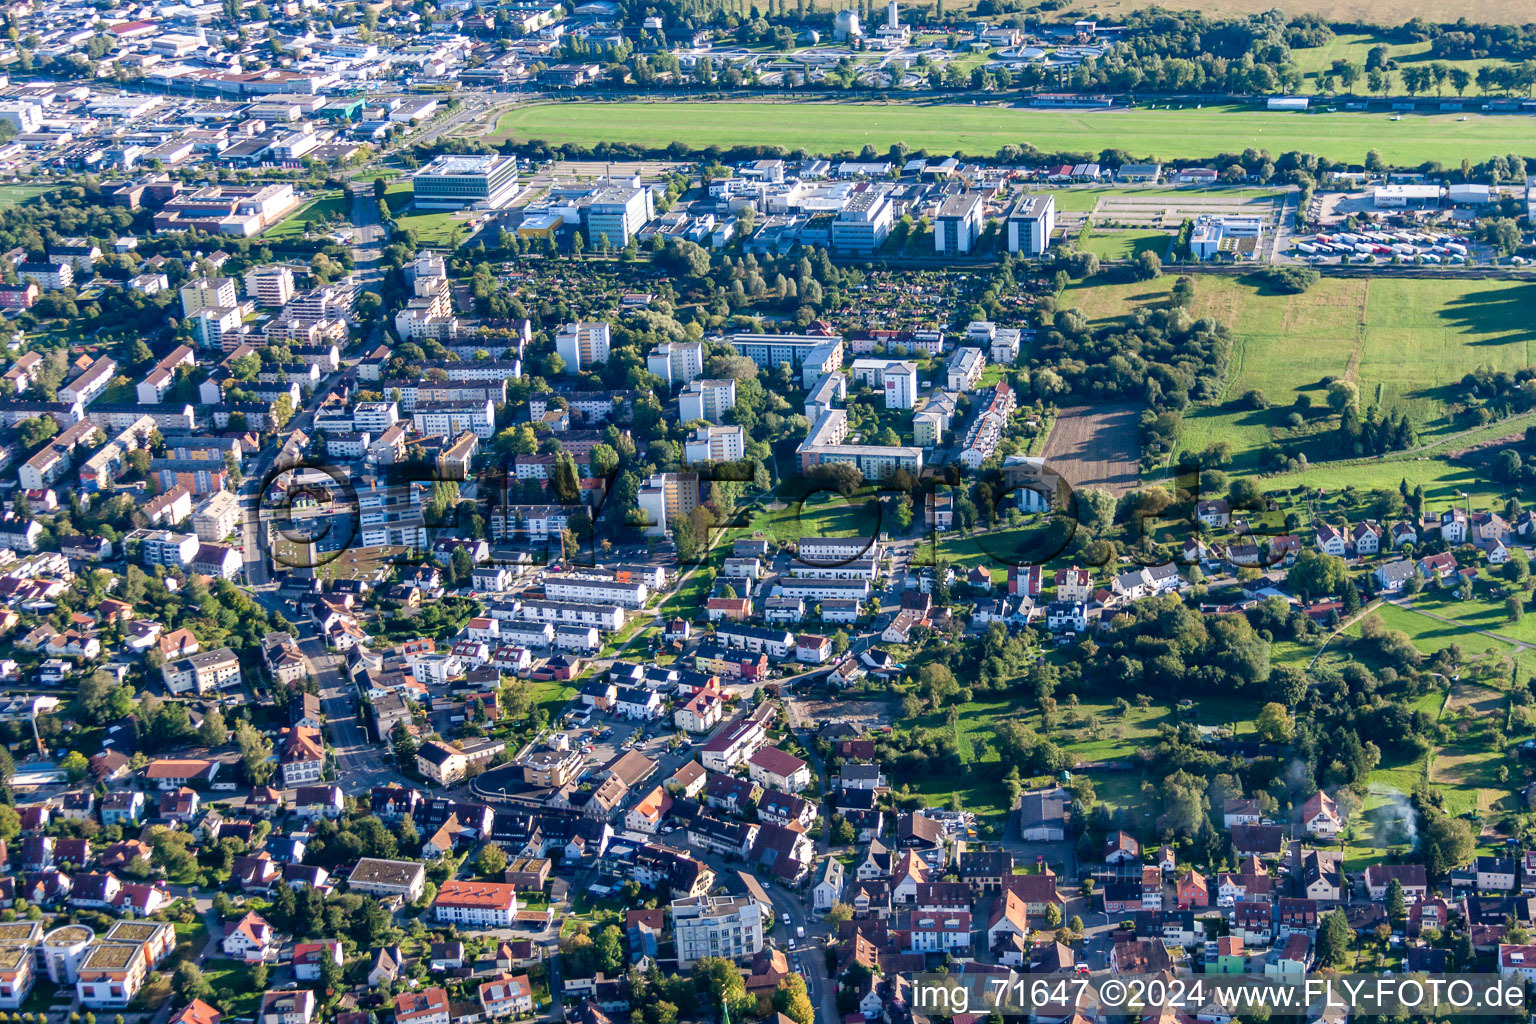 Drone image of District Wollmatingen in Konstanz in the state Baden-Wuerttemberg, Germany